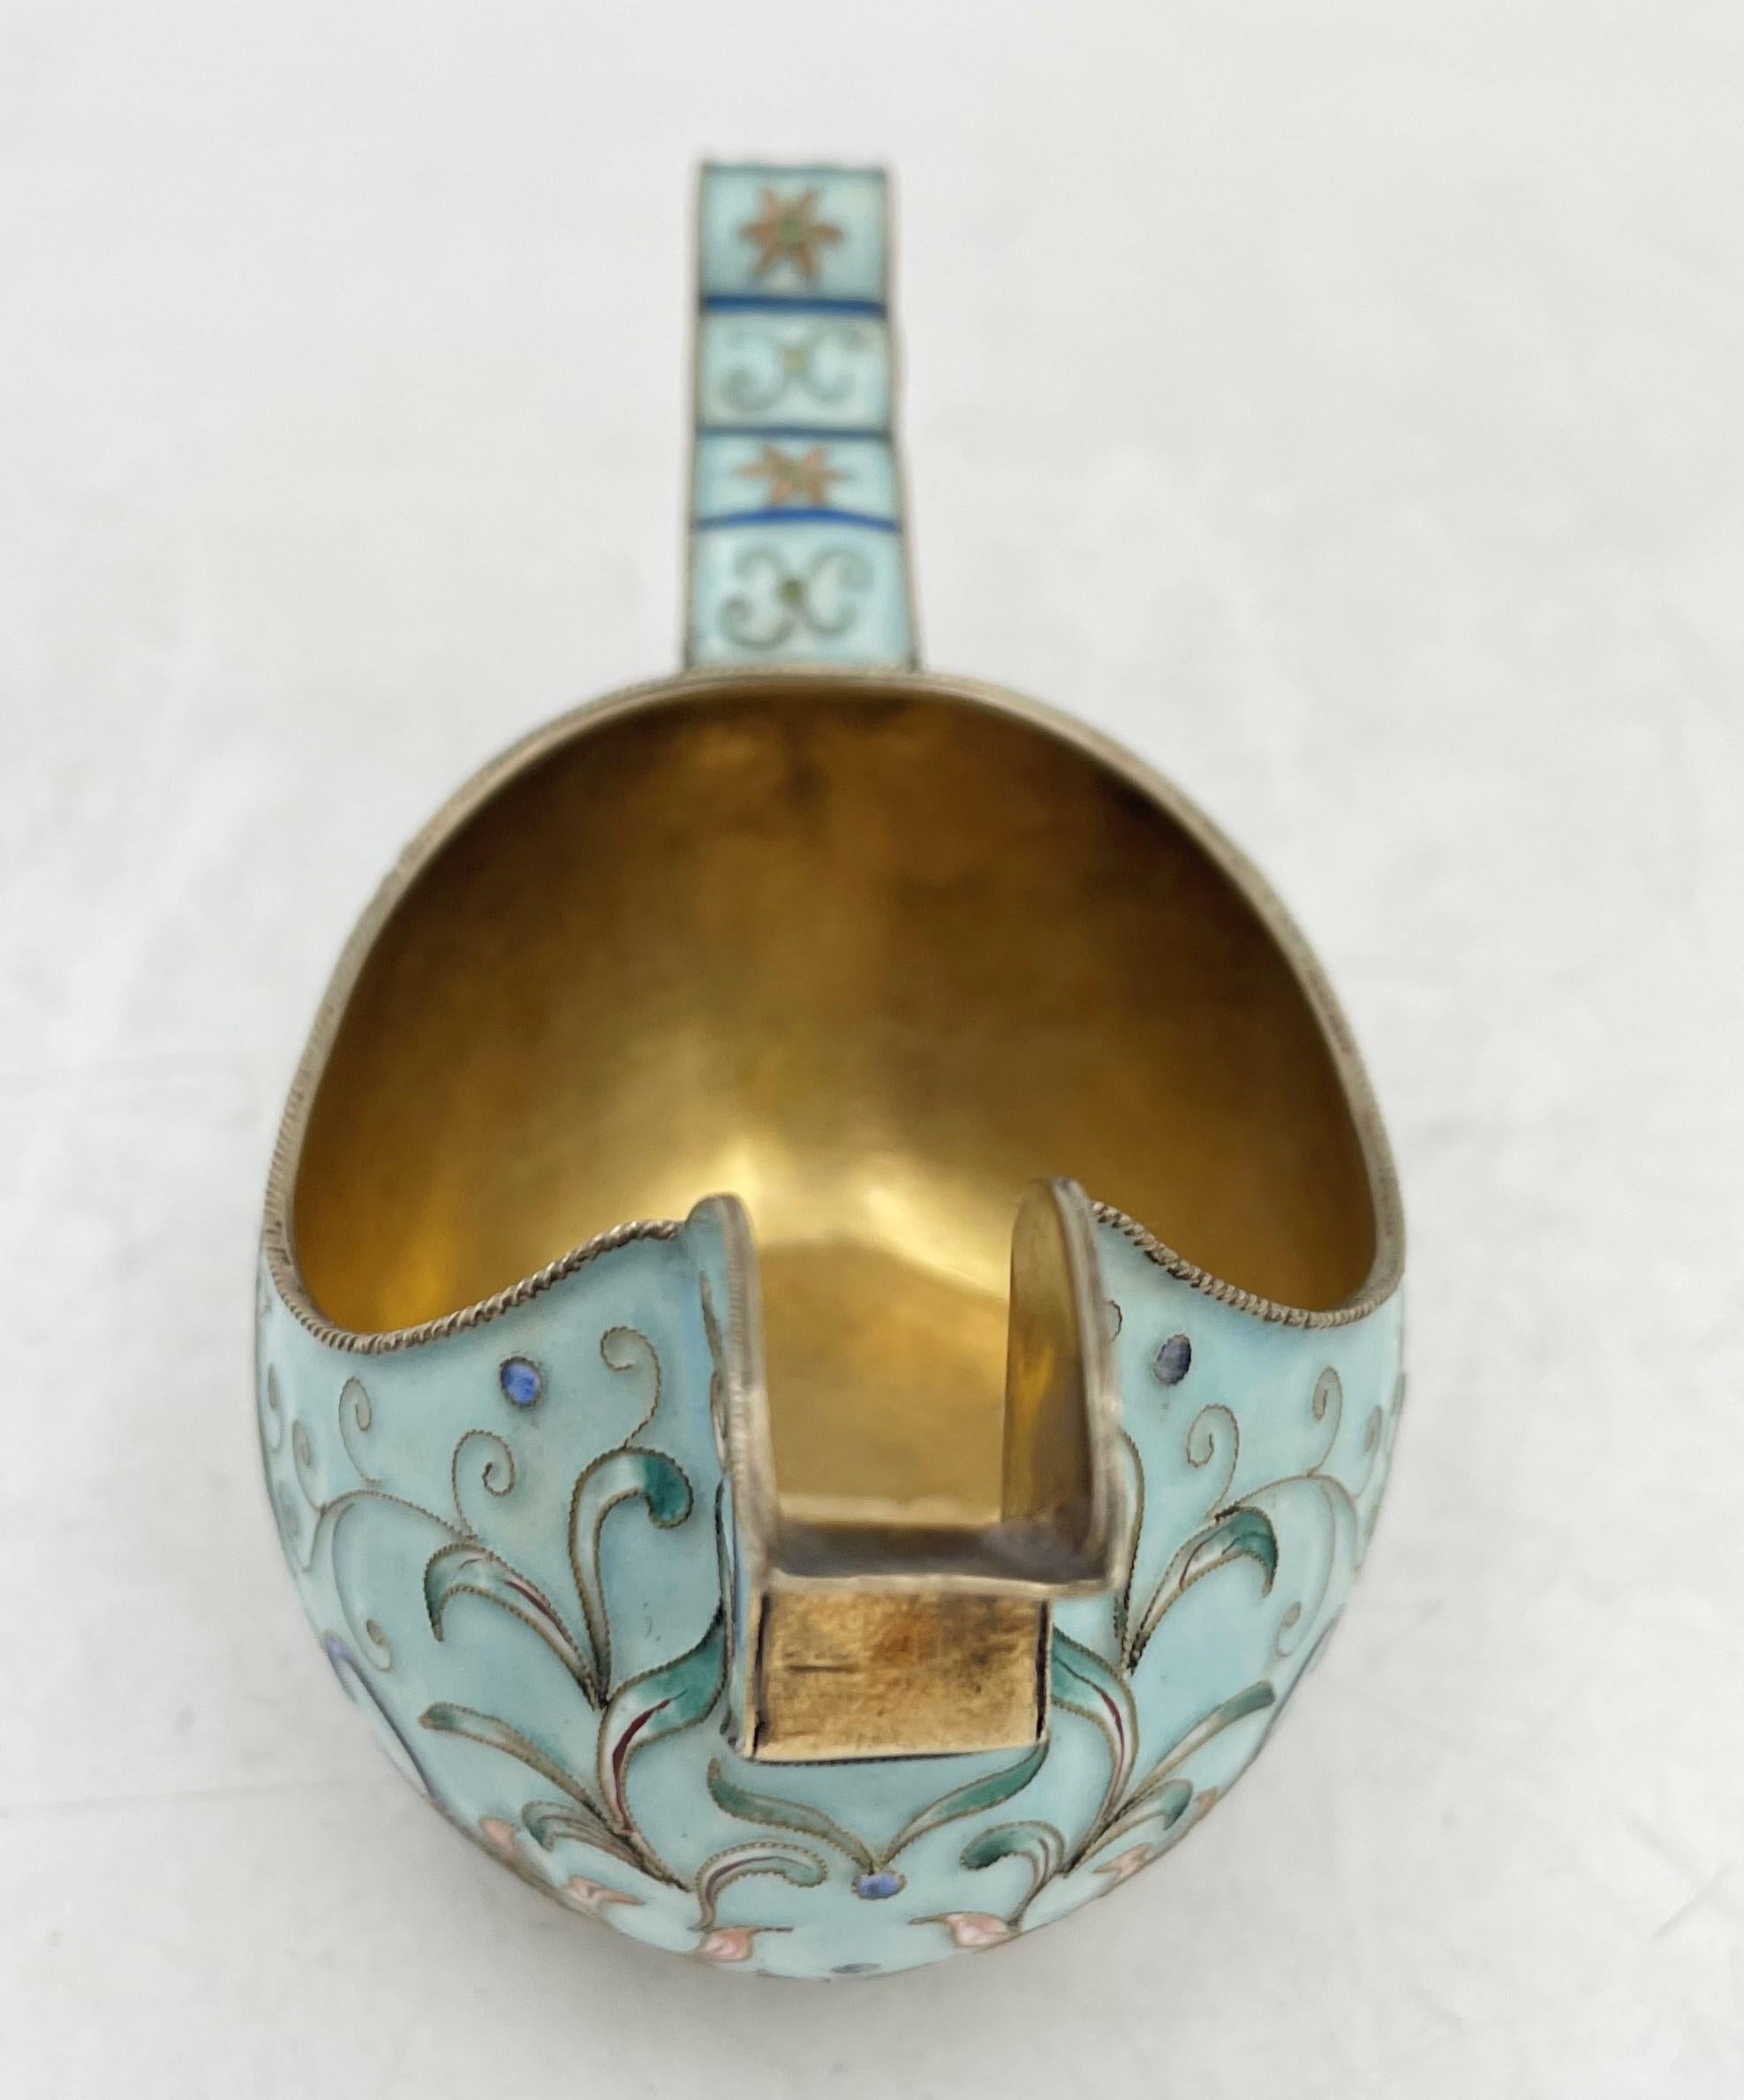 Russian, cloisonne enamel on 0.84 silver kovsh in Faberge style, measuring 4 3/4'' in length by 2 1/8'' in depth by 2 1/2'' in height, weighing 3.3 troy ounces (102.6 grams), and bearing hallmarks as shown. 

We hand polish all items before